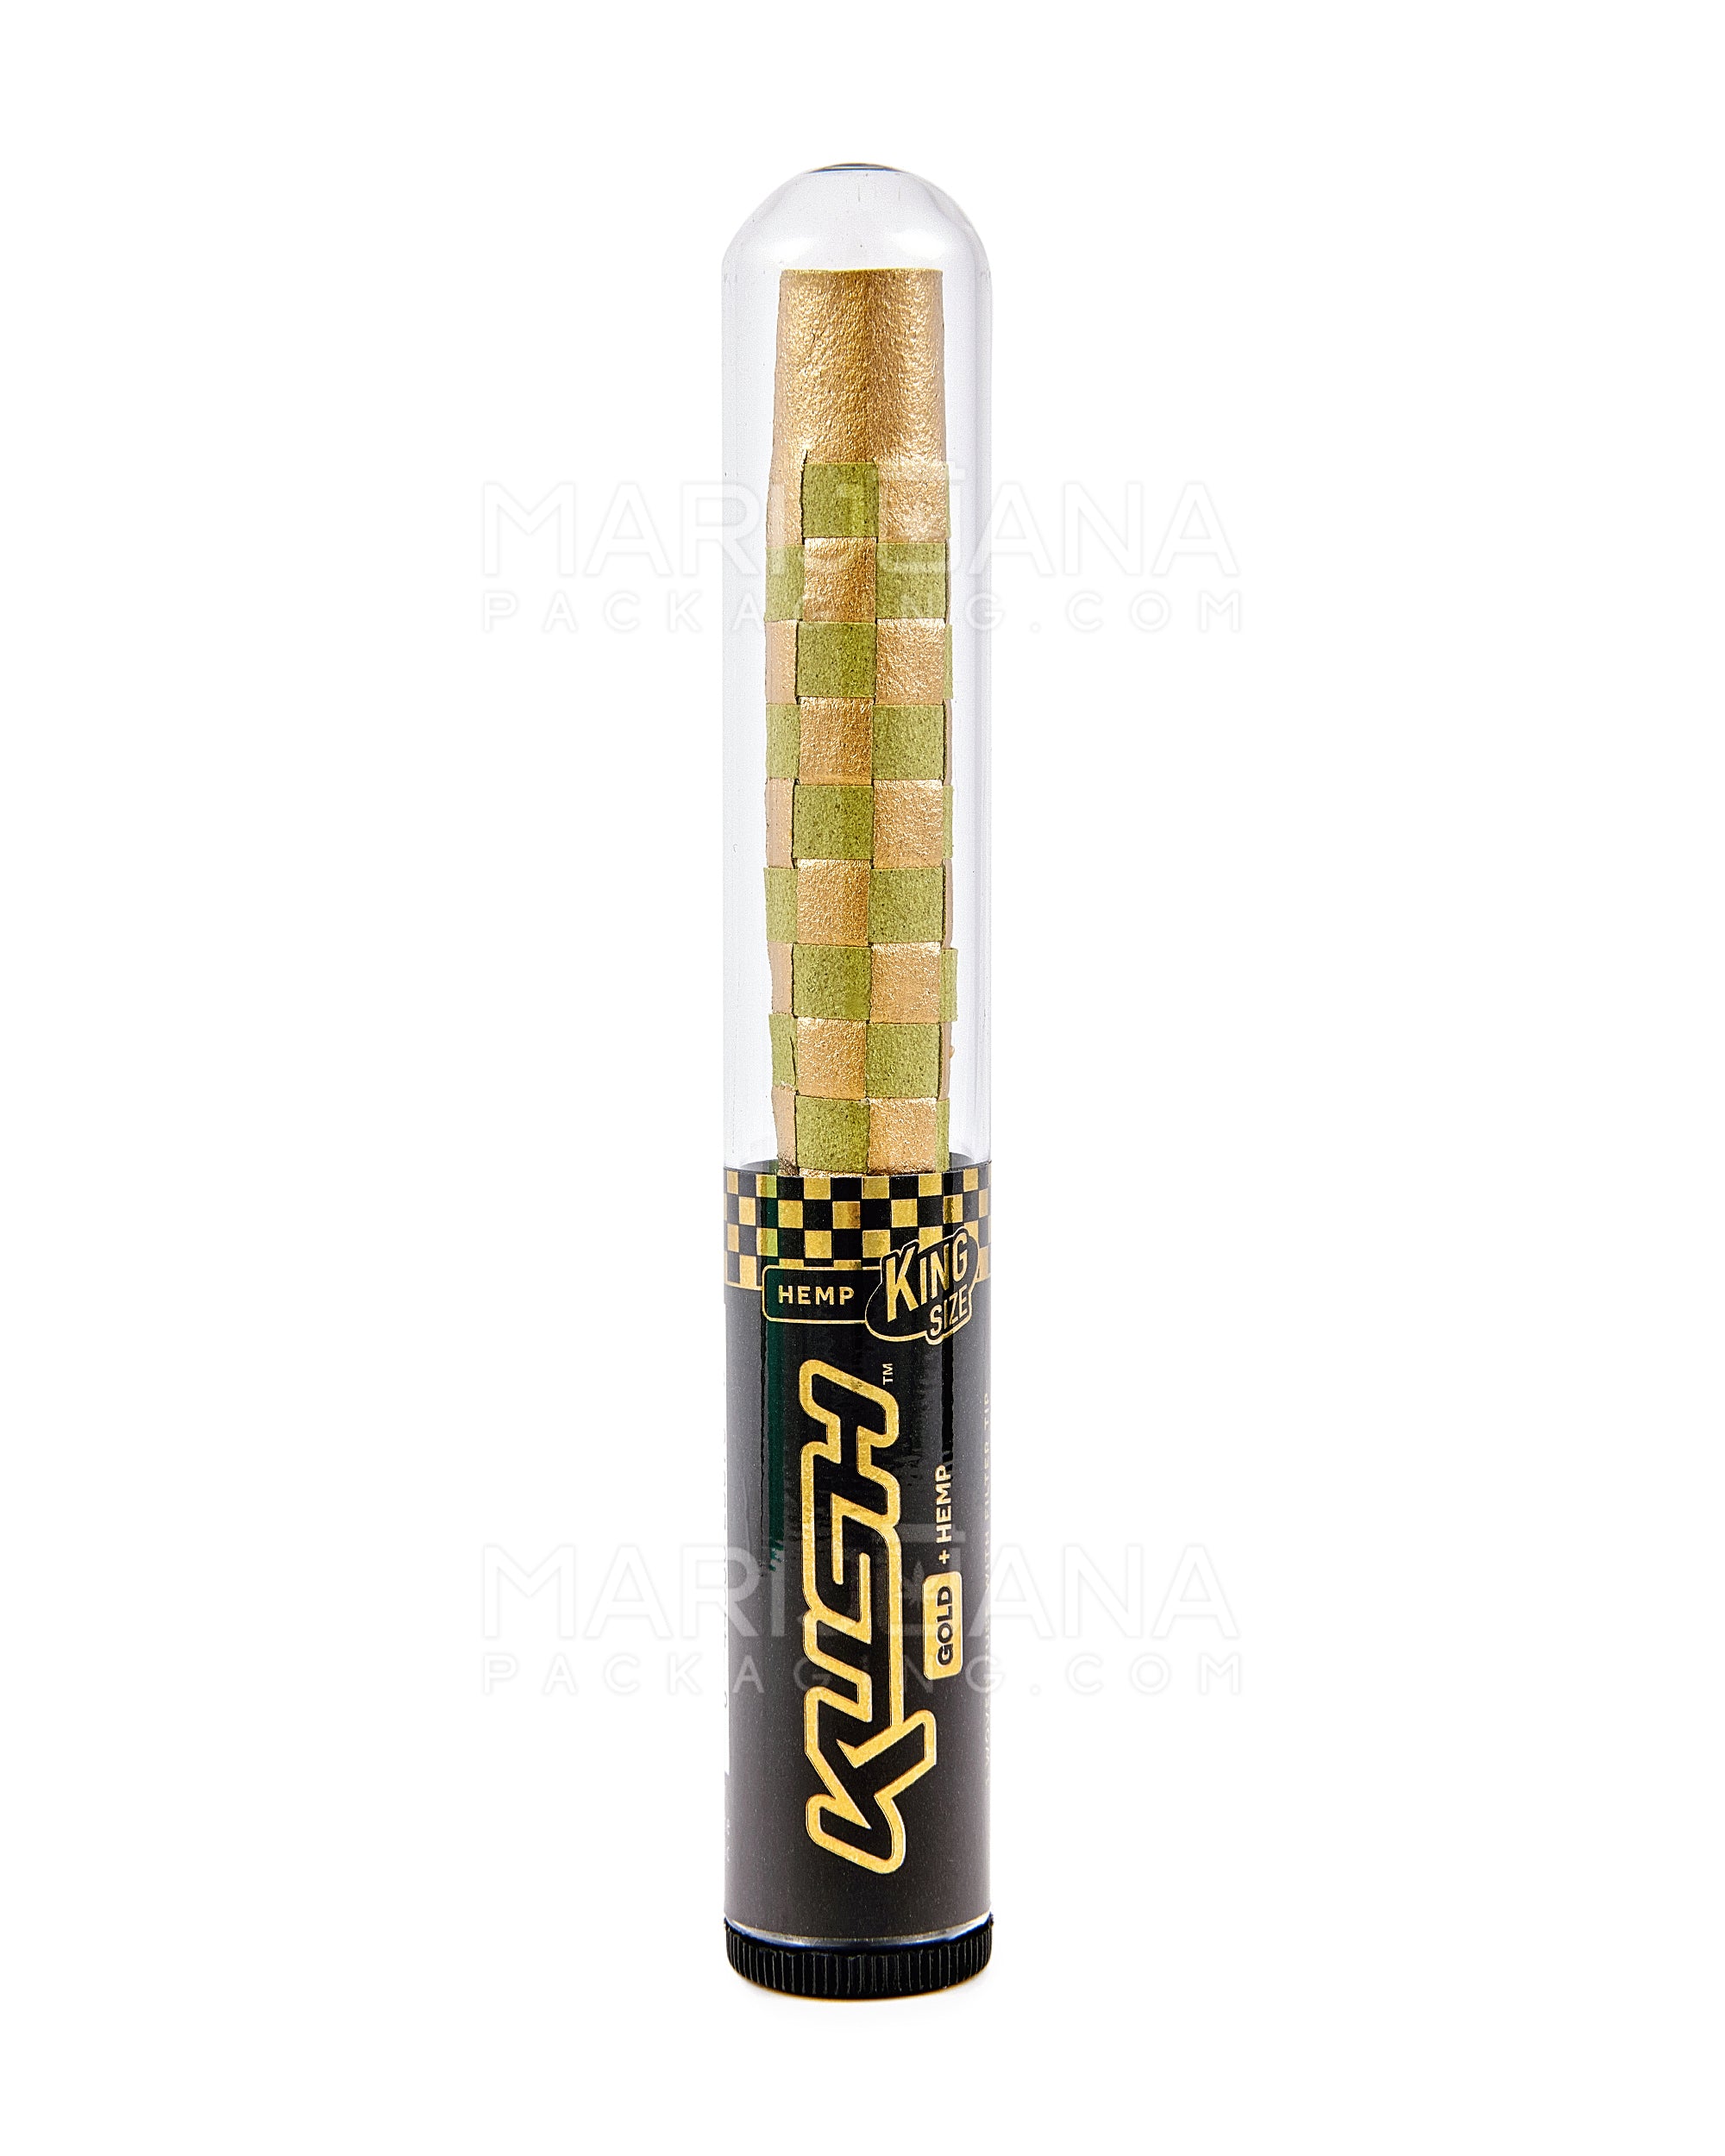 KUSH | 'Retail Display' 24K Gold King Size Woven Hemp Pre Rolled Cones | 63mm - Edible Gold - 4 Count - 2